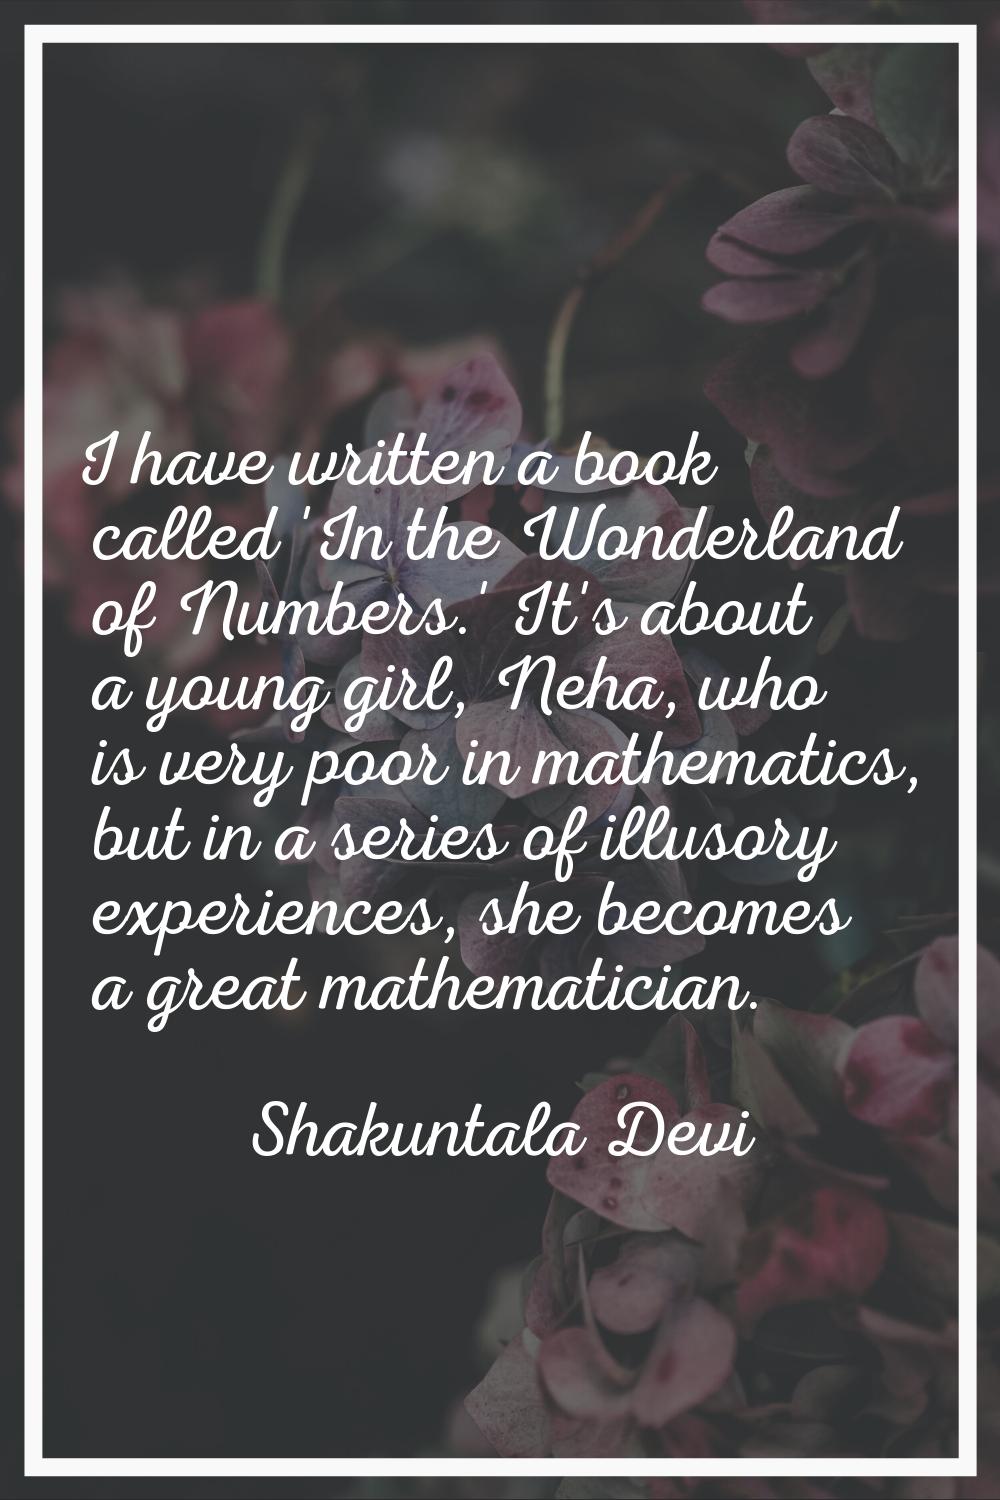 I have written a book called 'In the Wonderland of Numbers.' It's about a young girl, Neha, who is 